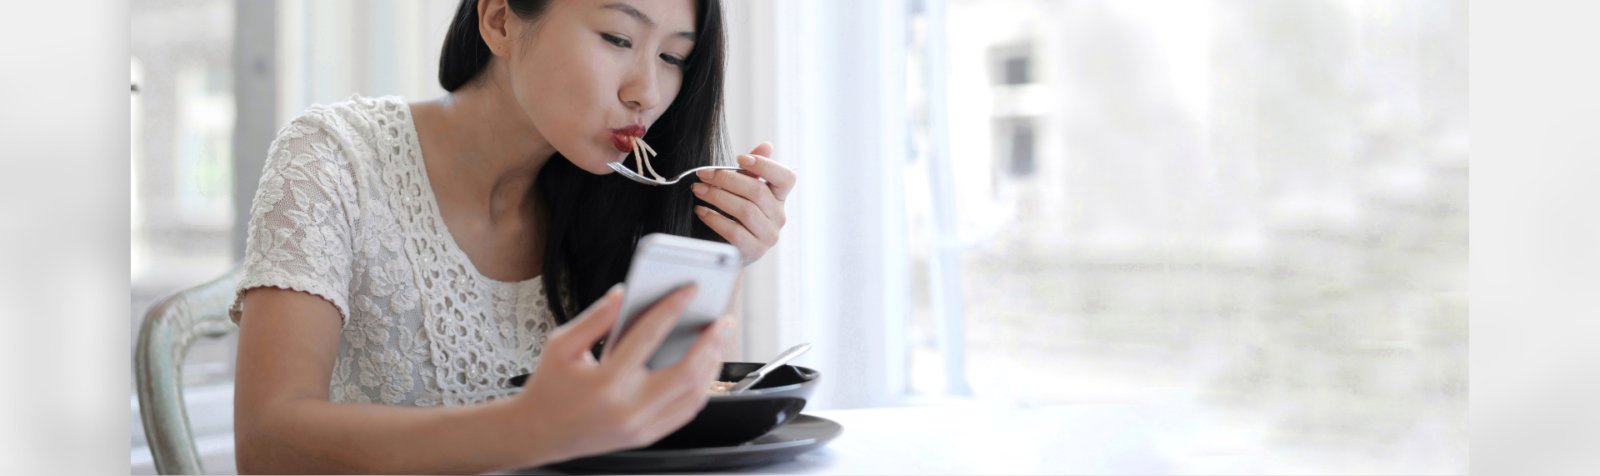 Girl eating while using her phone